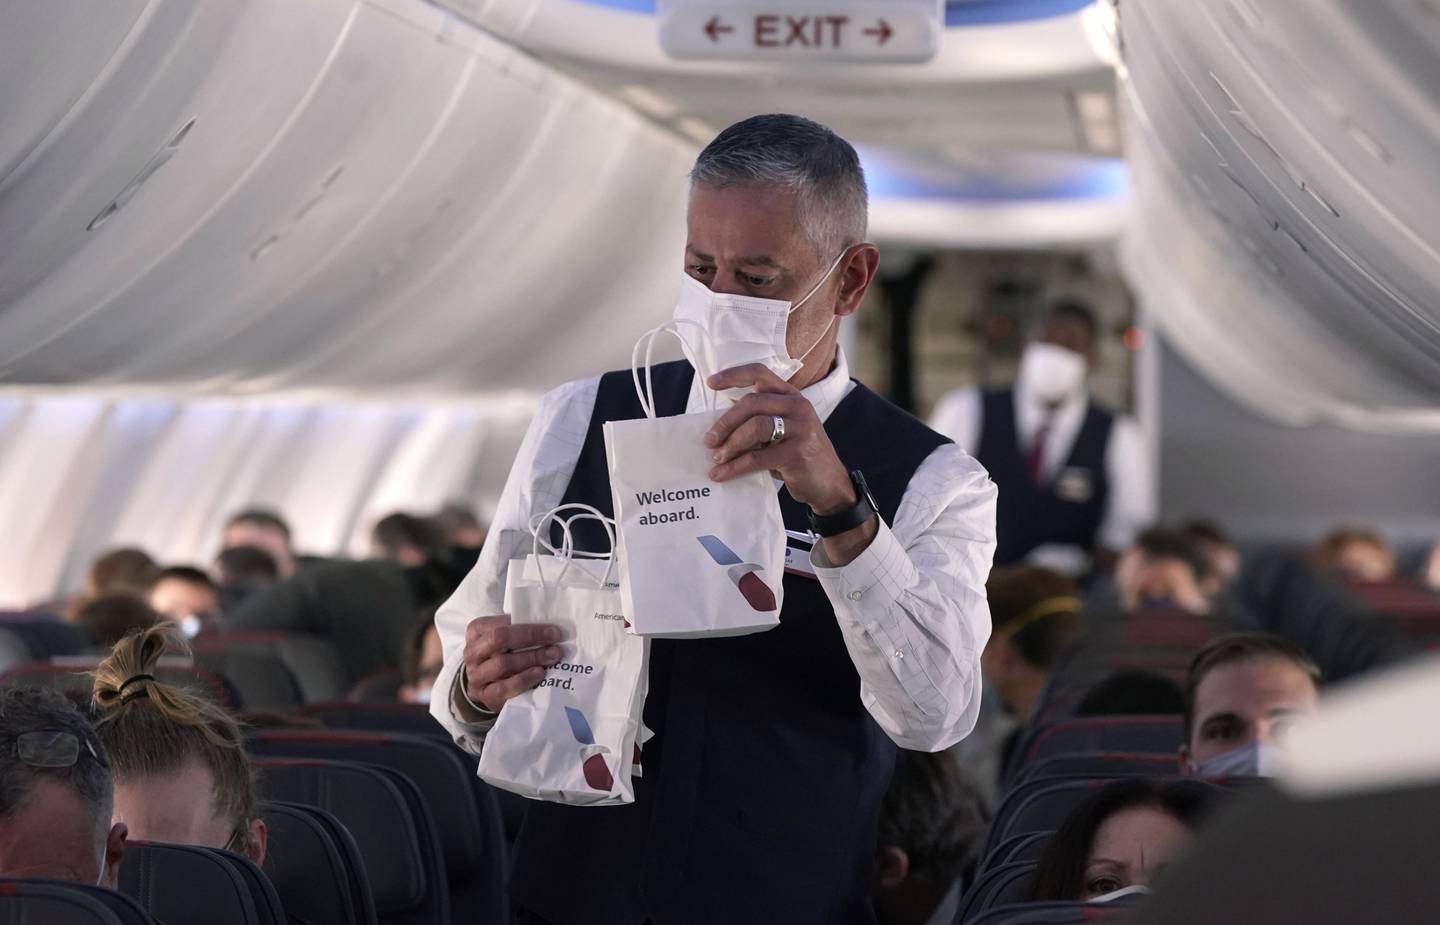 An American Airlines flight attendant hands out snack bags during a flight from Dallas Fort Worth airport in Grapevine, Texas. AP Photo 